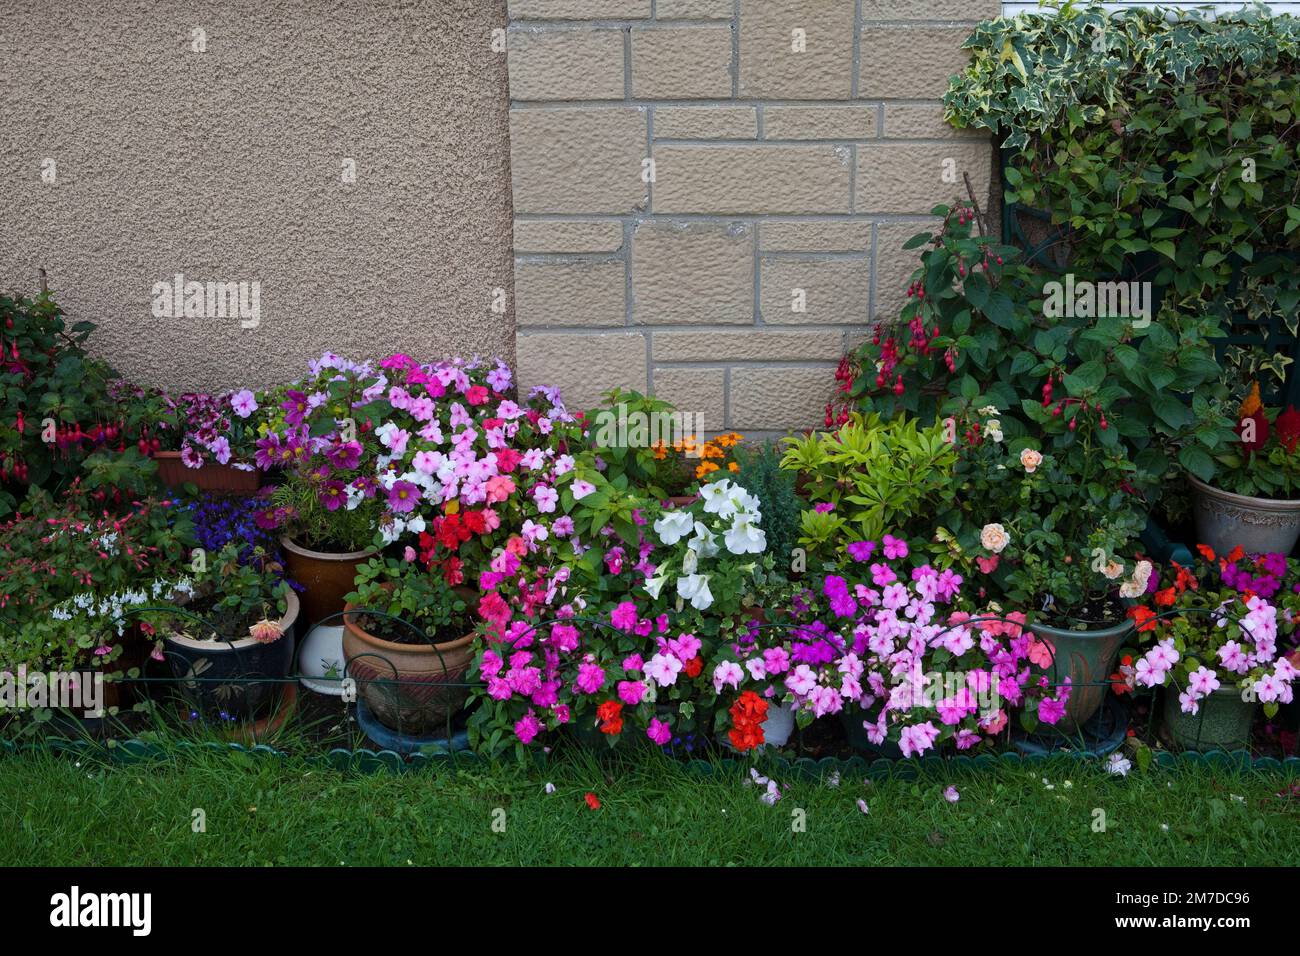 Pot plants flowers and shrubs make a great display outside a house on a typical British housing estate. Stock Photo